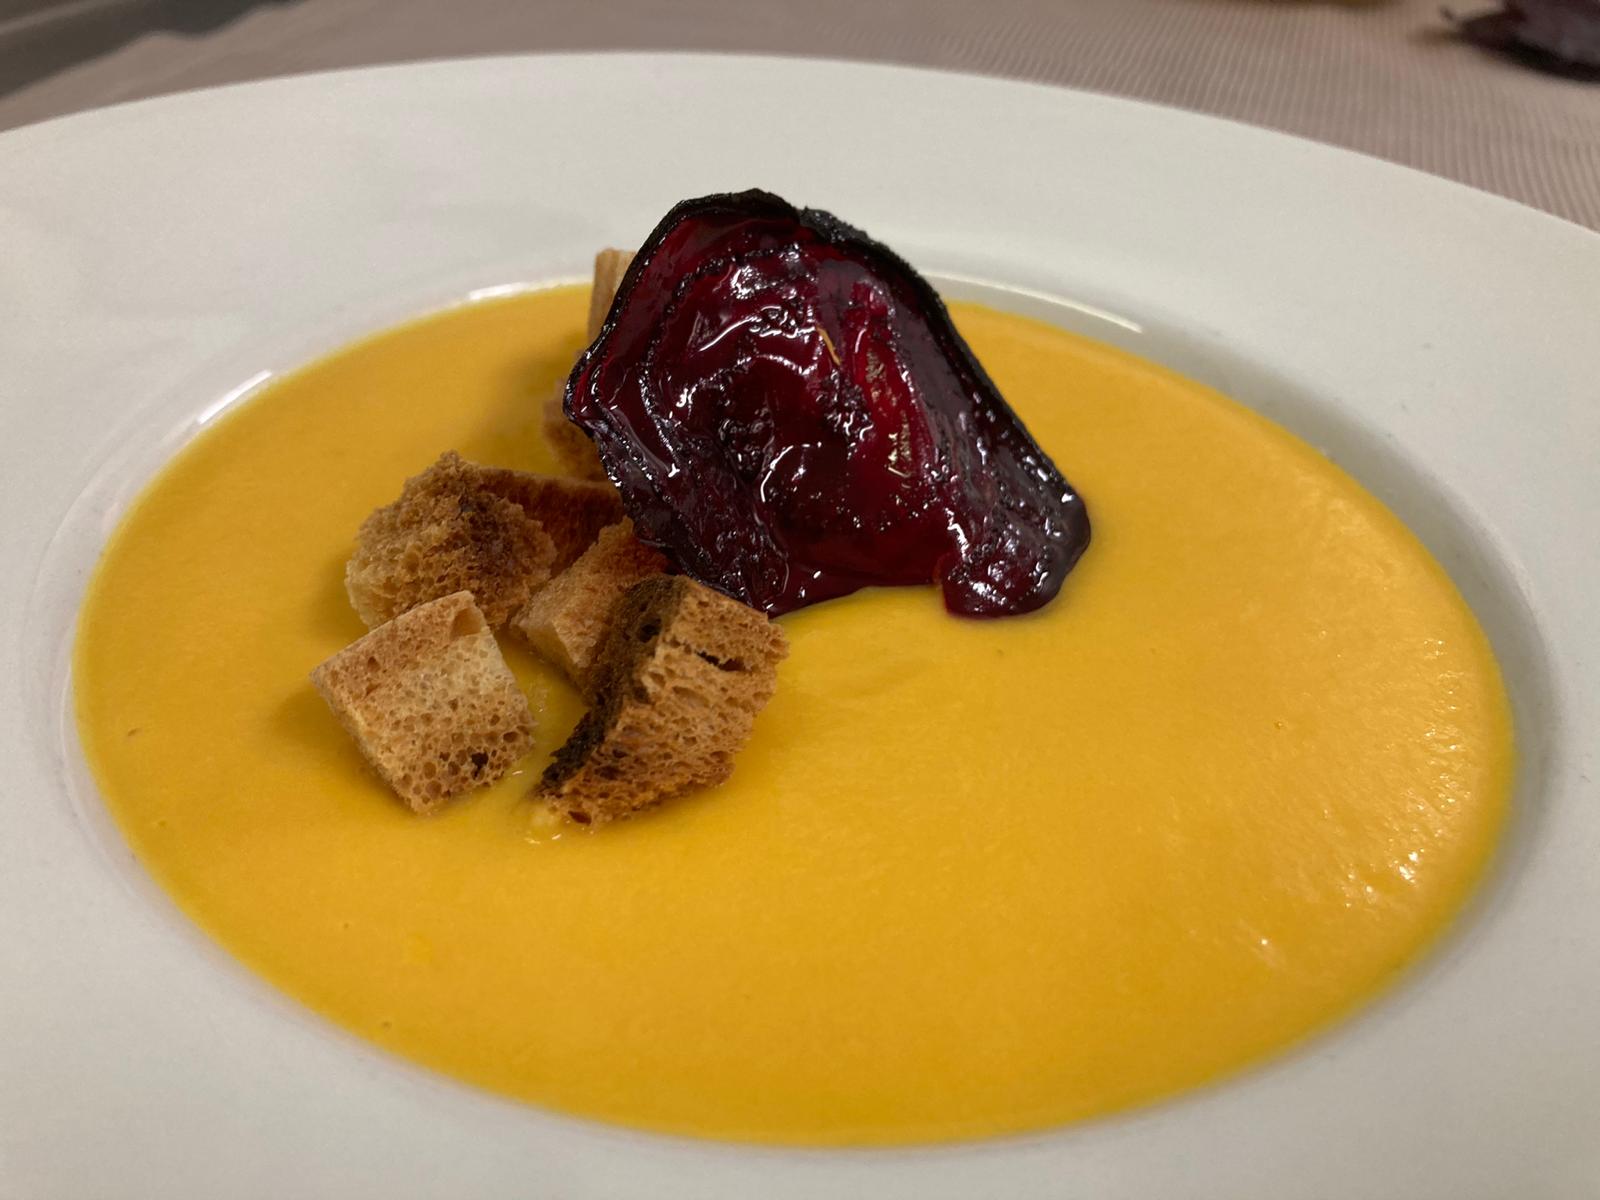 Pumpkin cream, croutons and crunchy beets